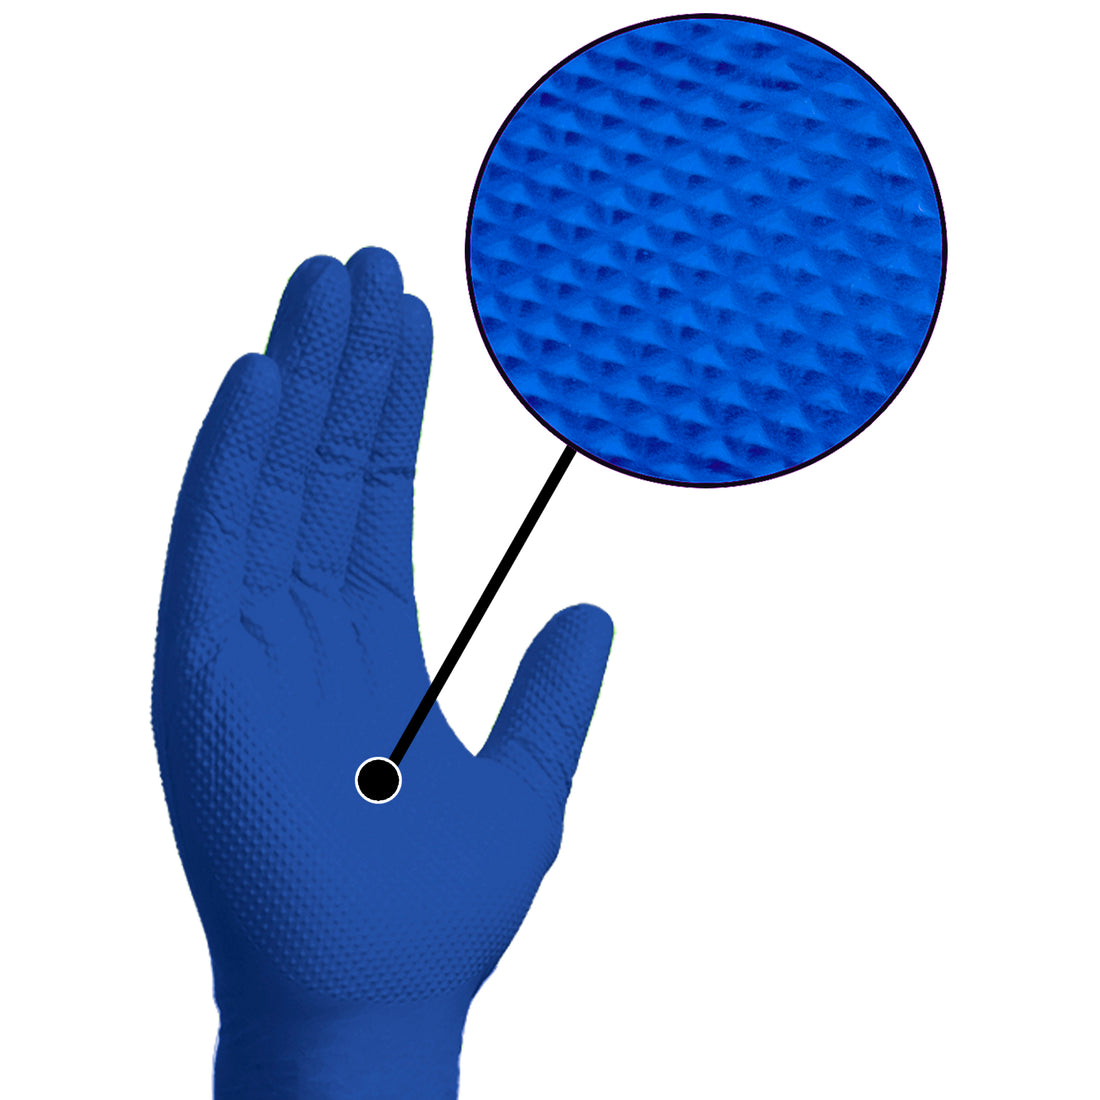 Choosing the Right Disposable Glove for the Job